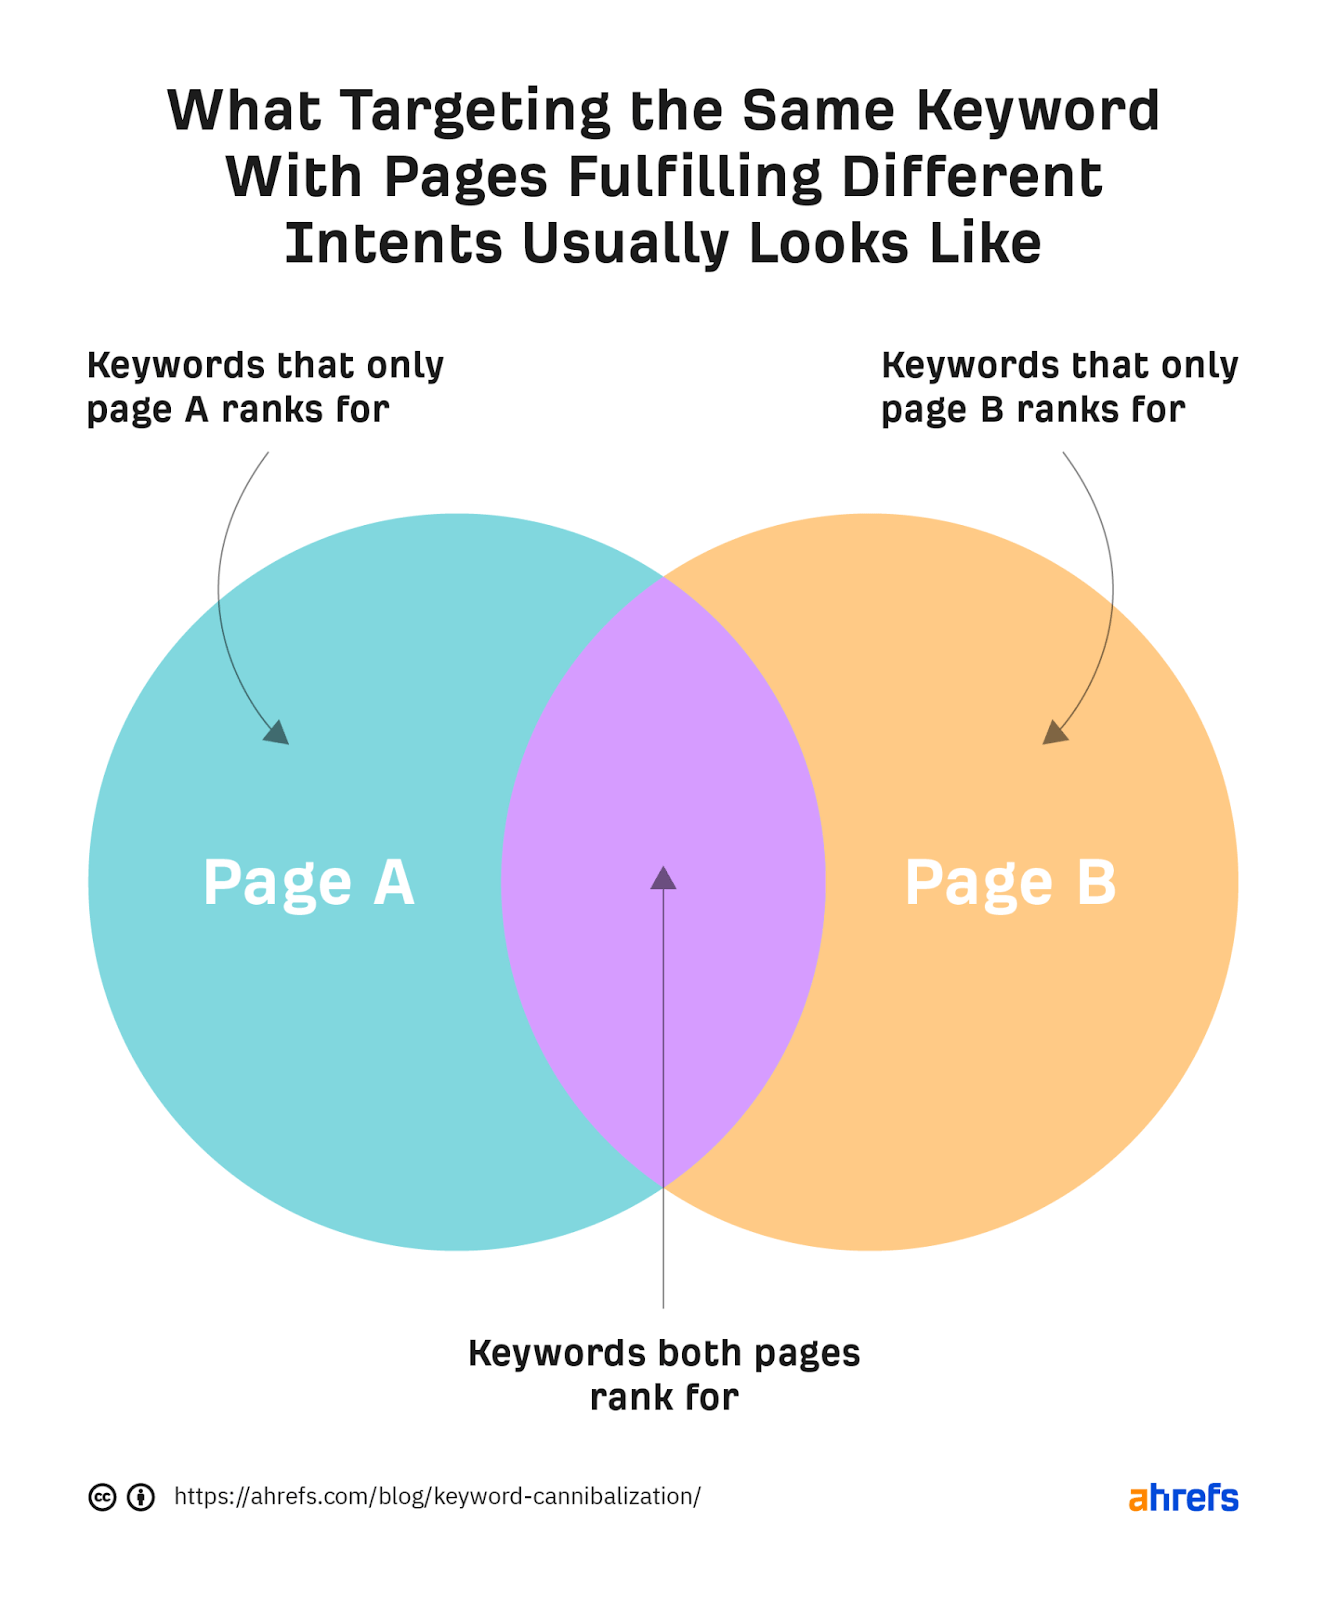 What targeting the same keywords with pages fulfilling different intents looks like